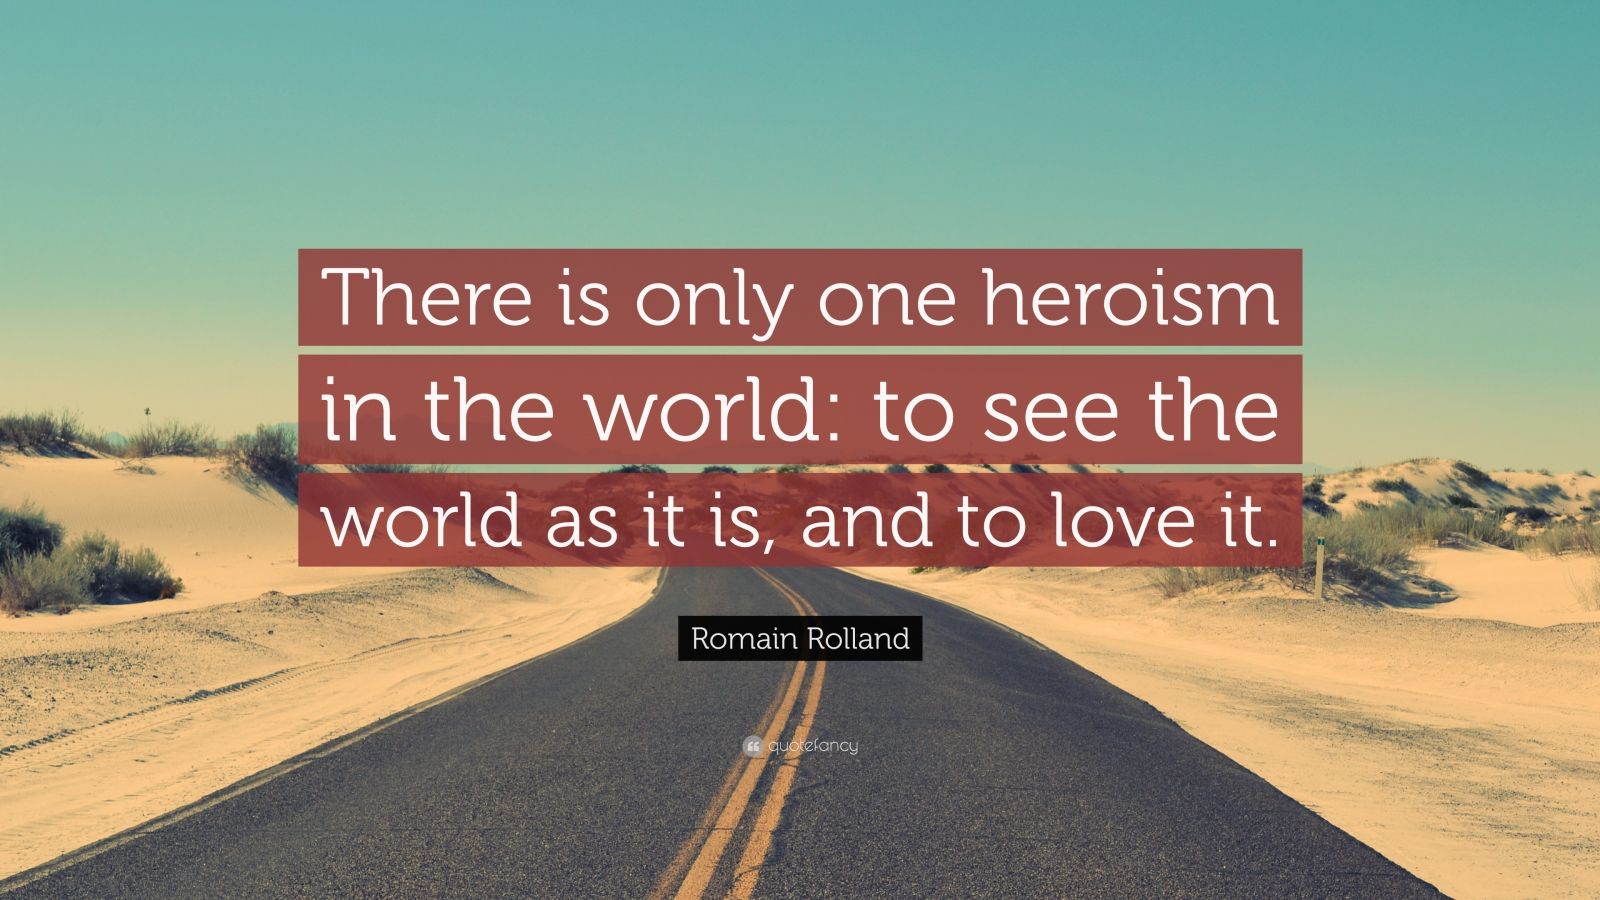 Romain Rolland Quote: “There is only one heroism in the world: to see